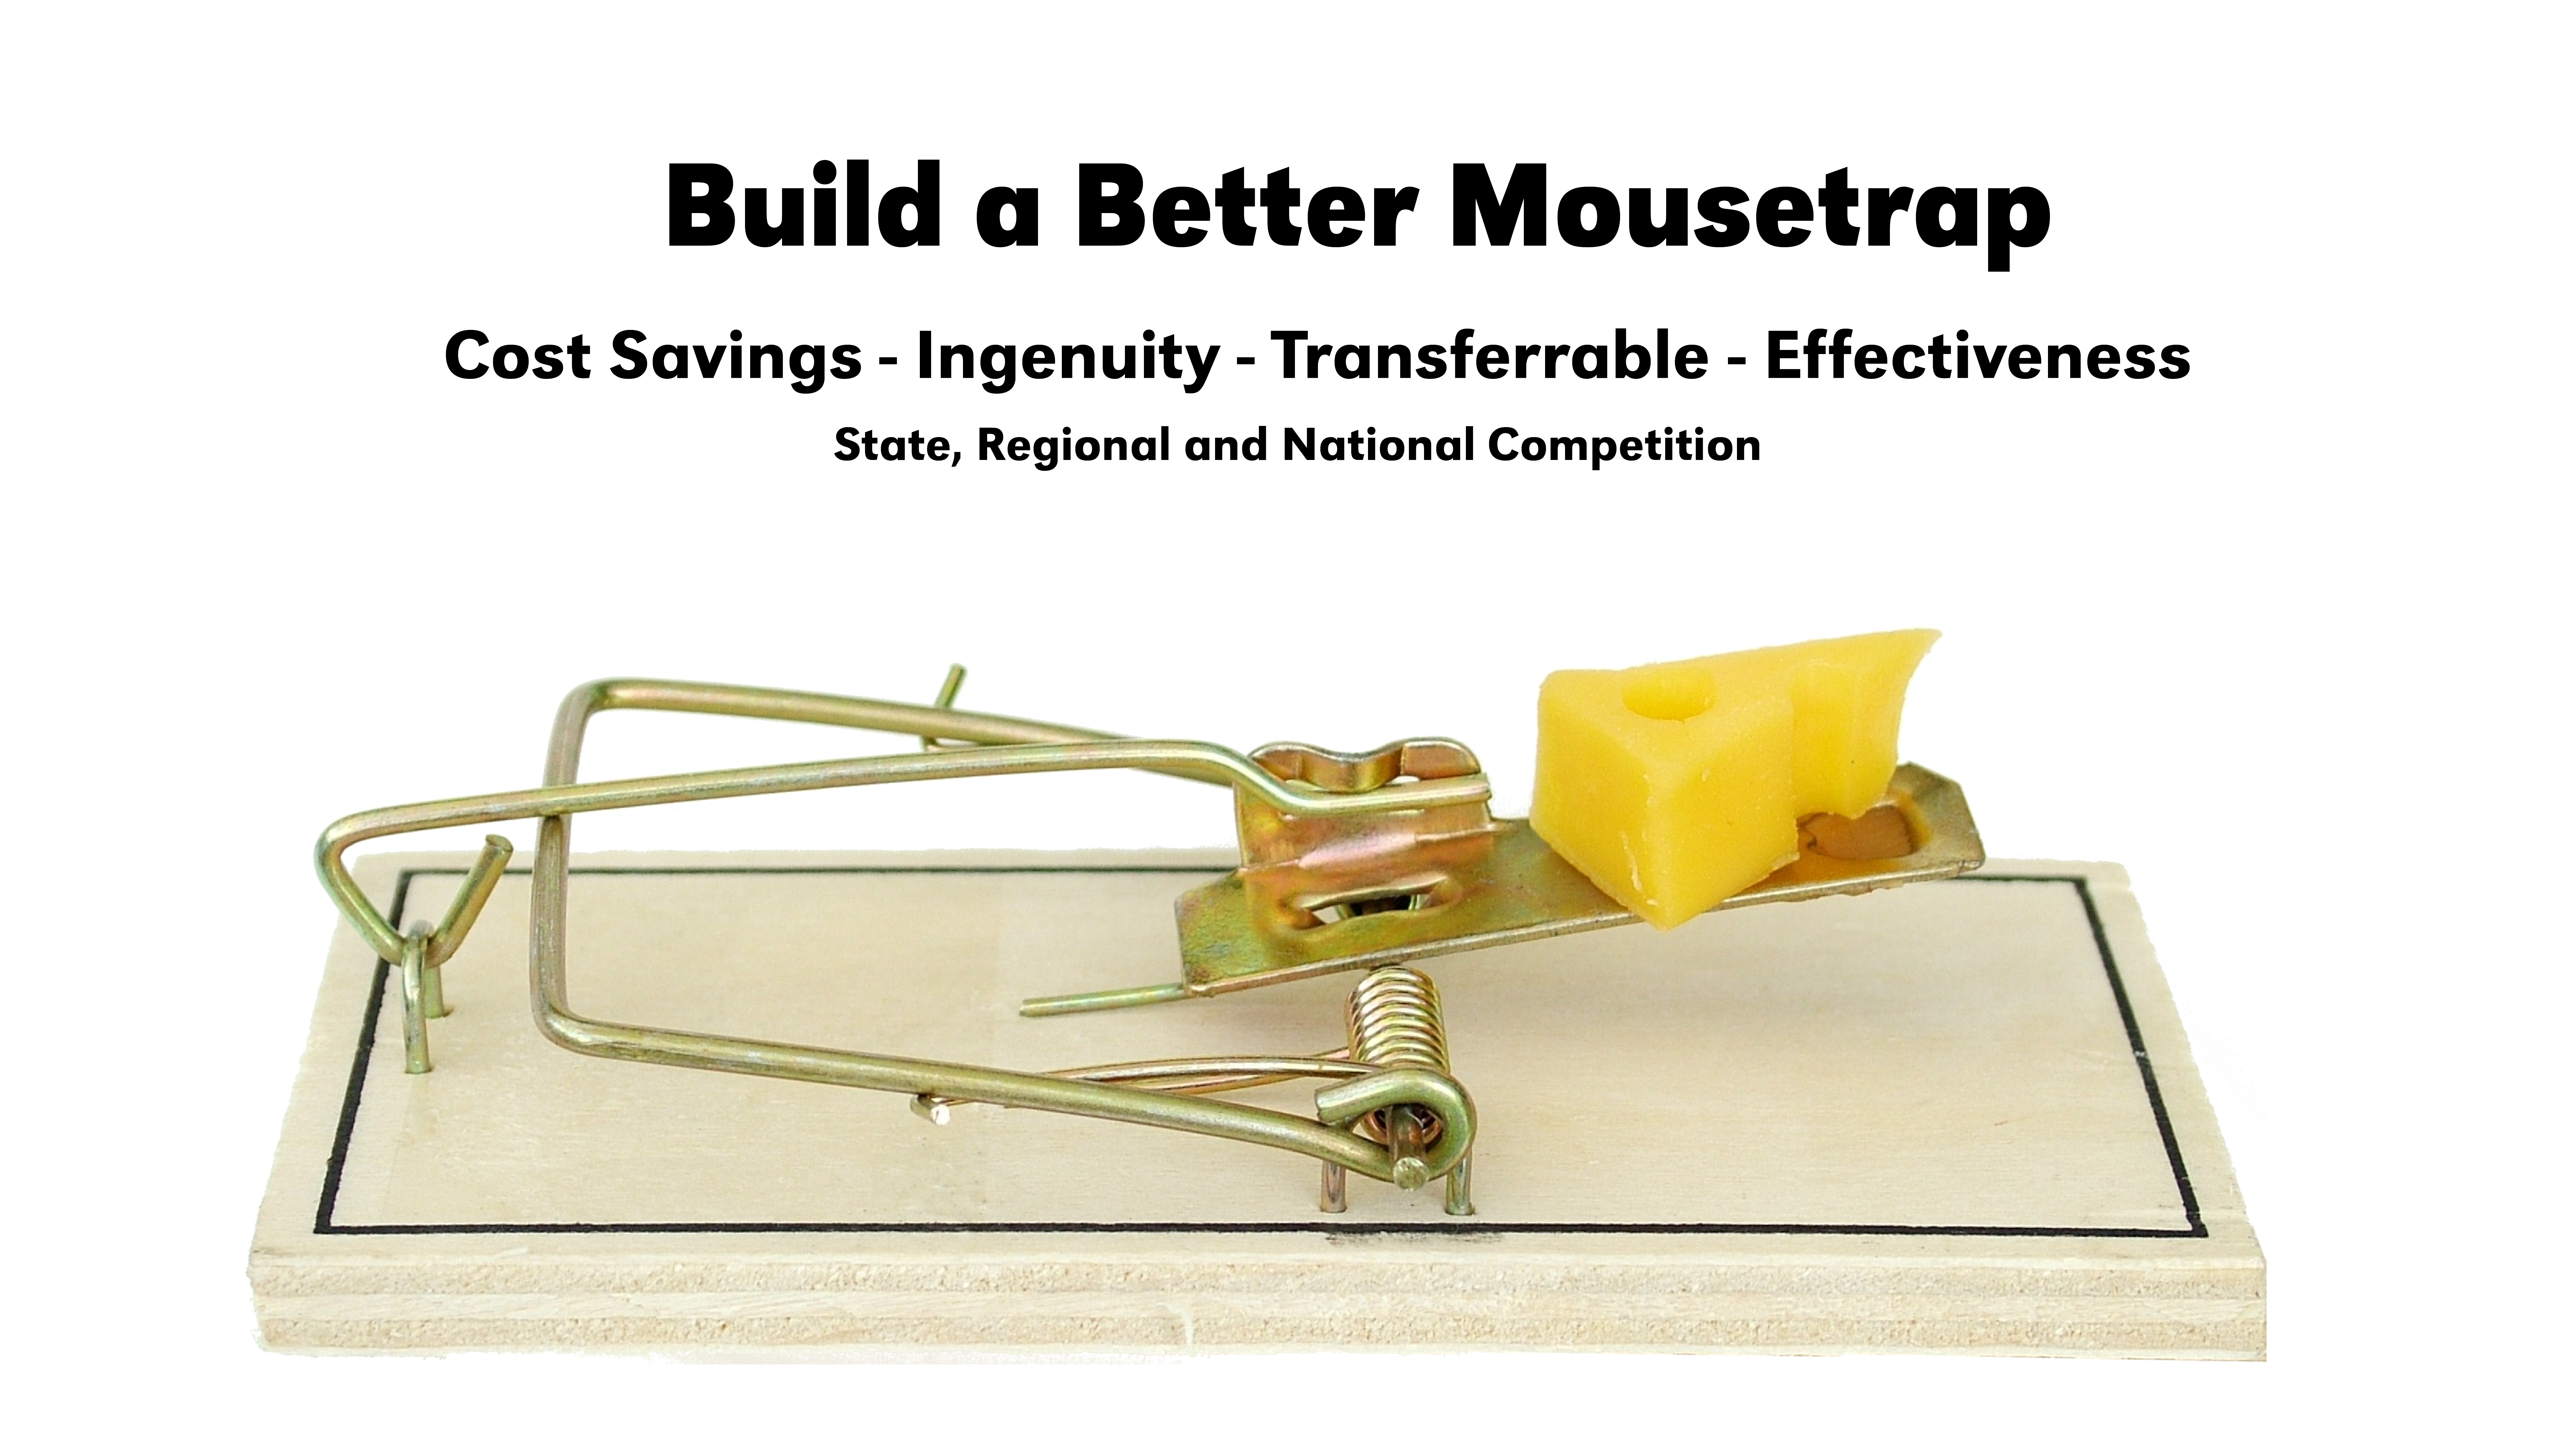 Enter the Build a Better Mousetrap competition today!